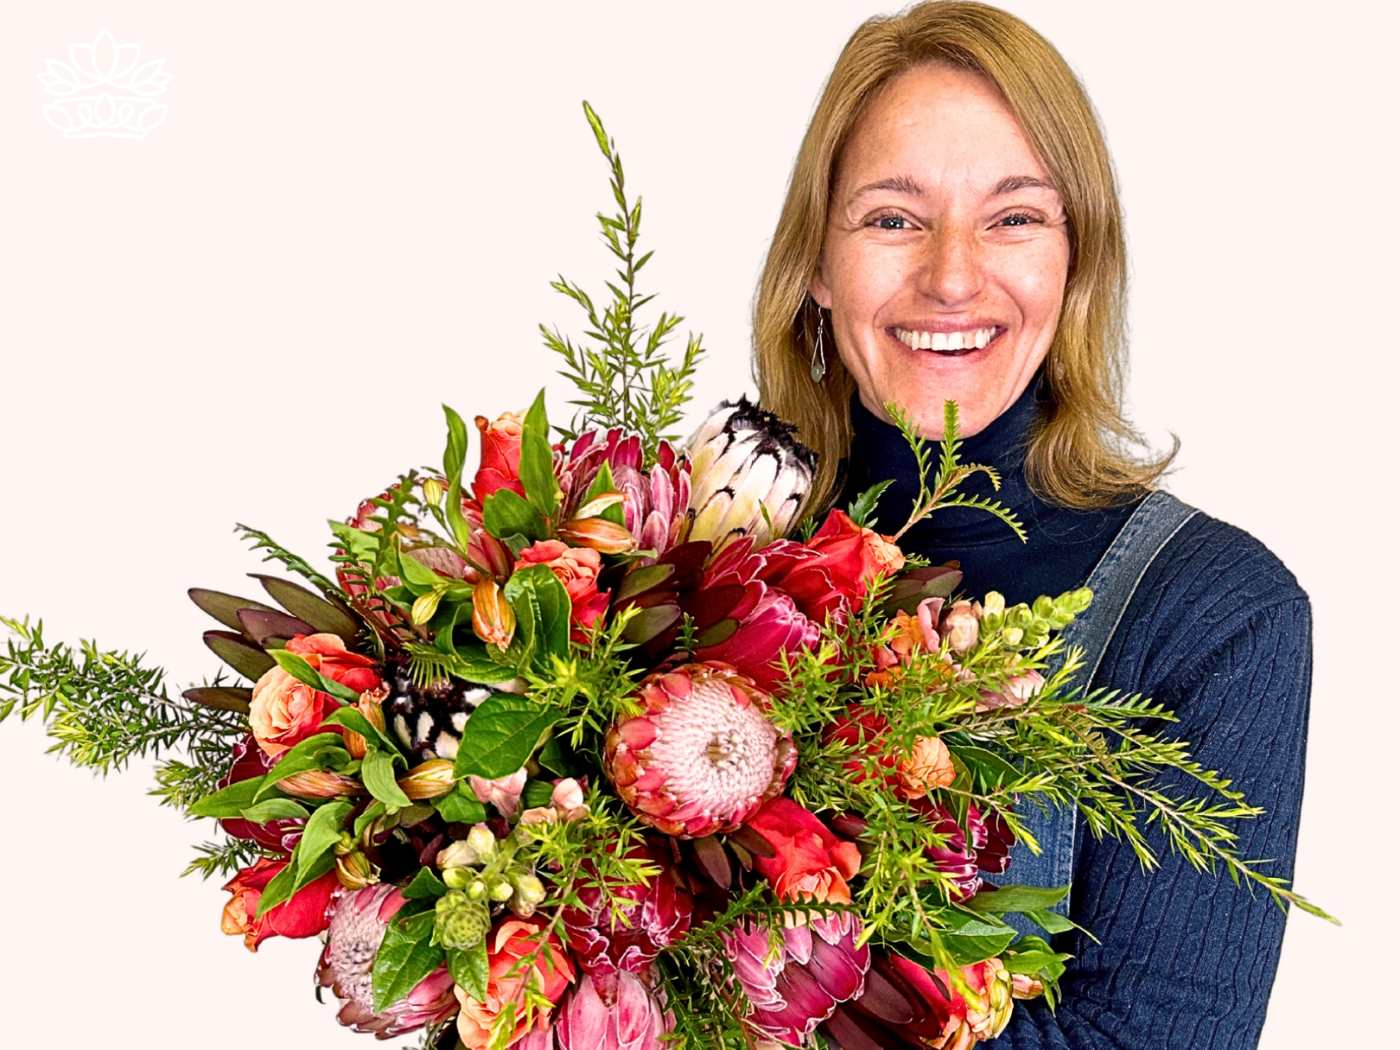 Joyful woman with a radiant smile, holding a classic range of florist-designed bouquets from the Florist Choice Bouquets Collection, featuring red proteas and pink lilies. Perfect for expressing support and affection to a sister or aunt. Fabulous Flowers and Gifts.